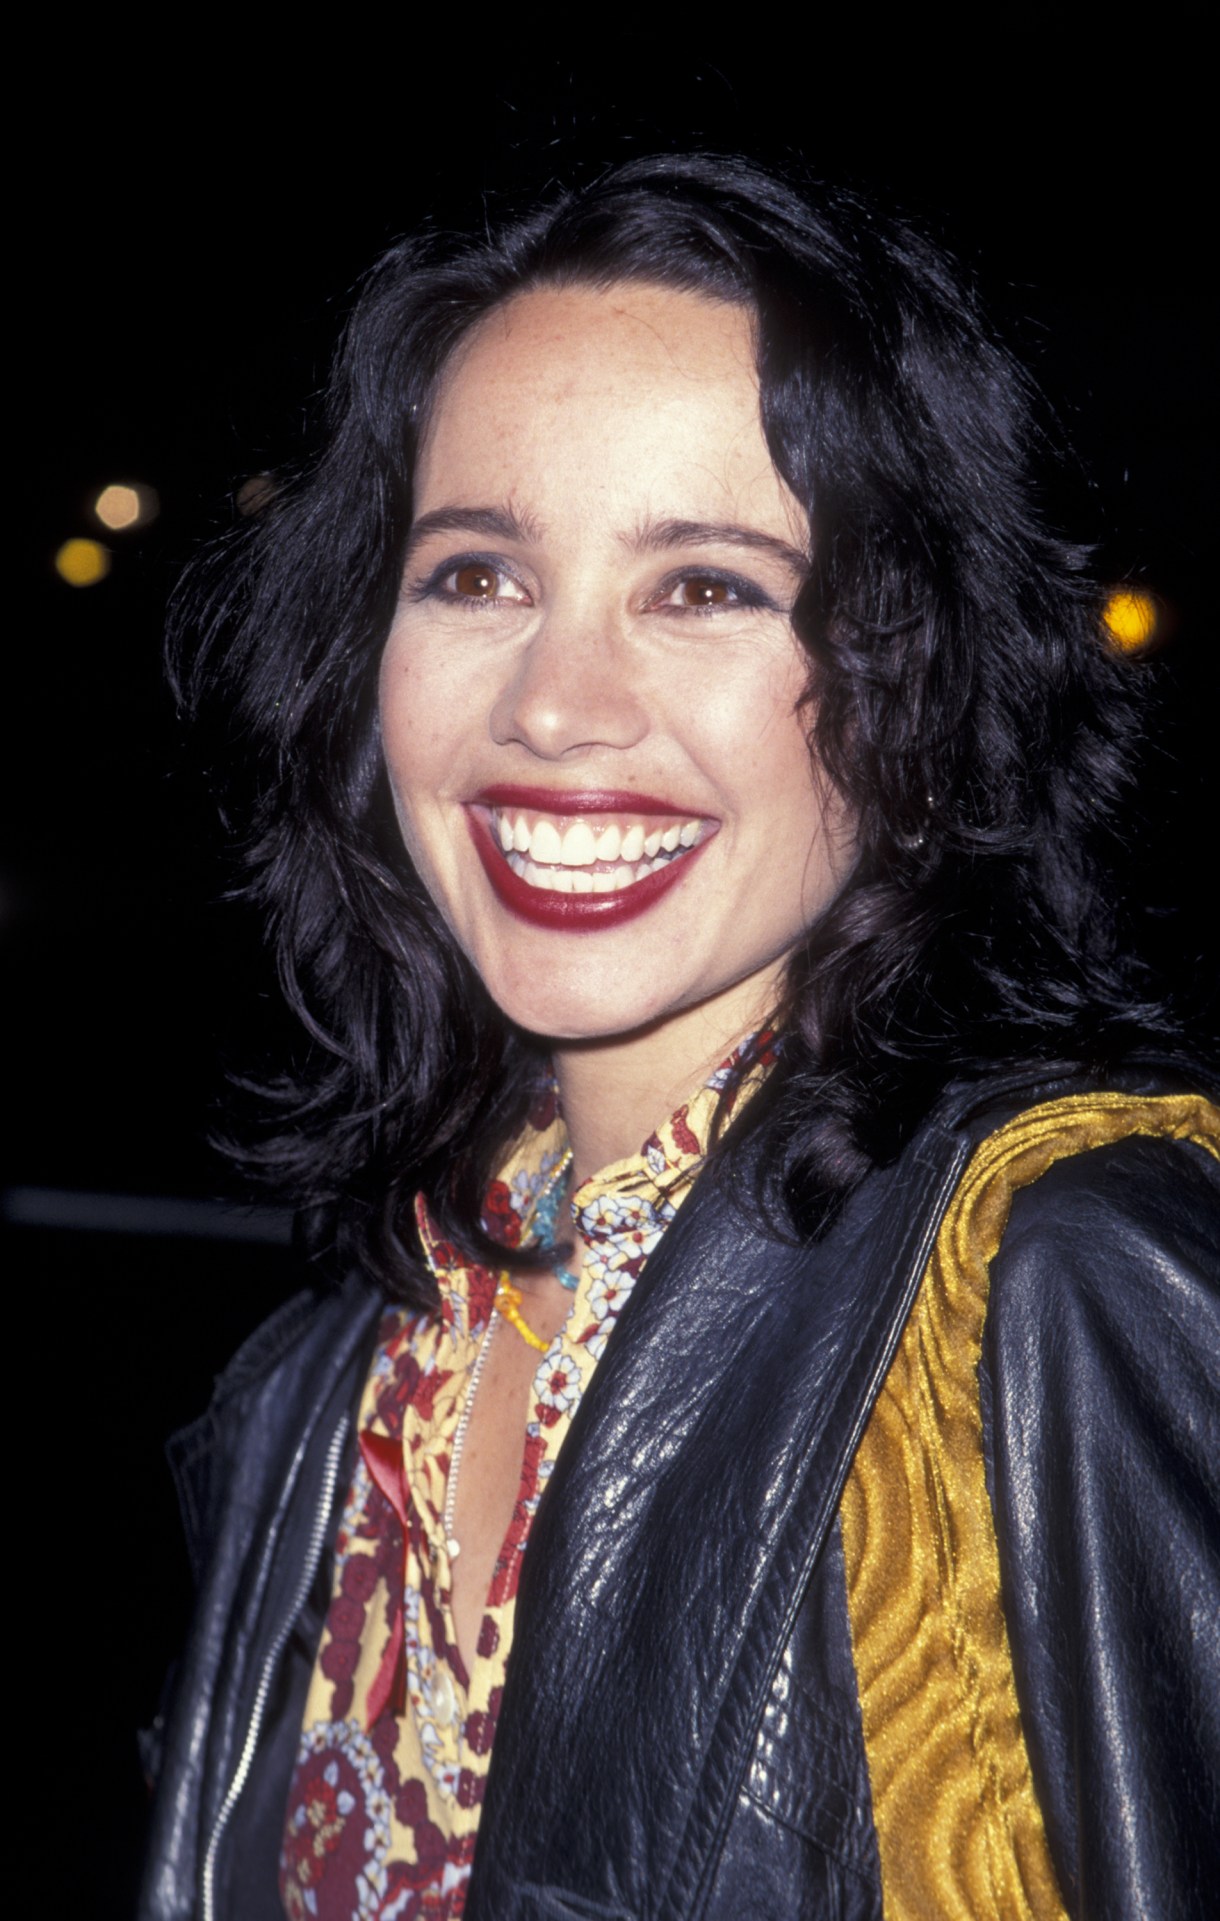 LOS ANGELES, CA - DECEMBER 2:  Janeane Garofalo attends 17th Annual Cable ACE Awards on December 2, 1995 at the Wiltern Theater in Los Angeles, California. 